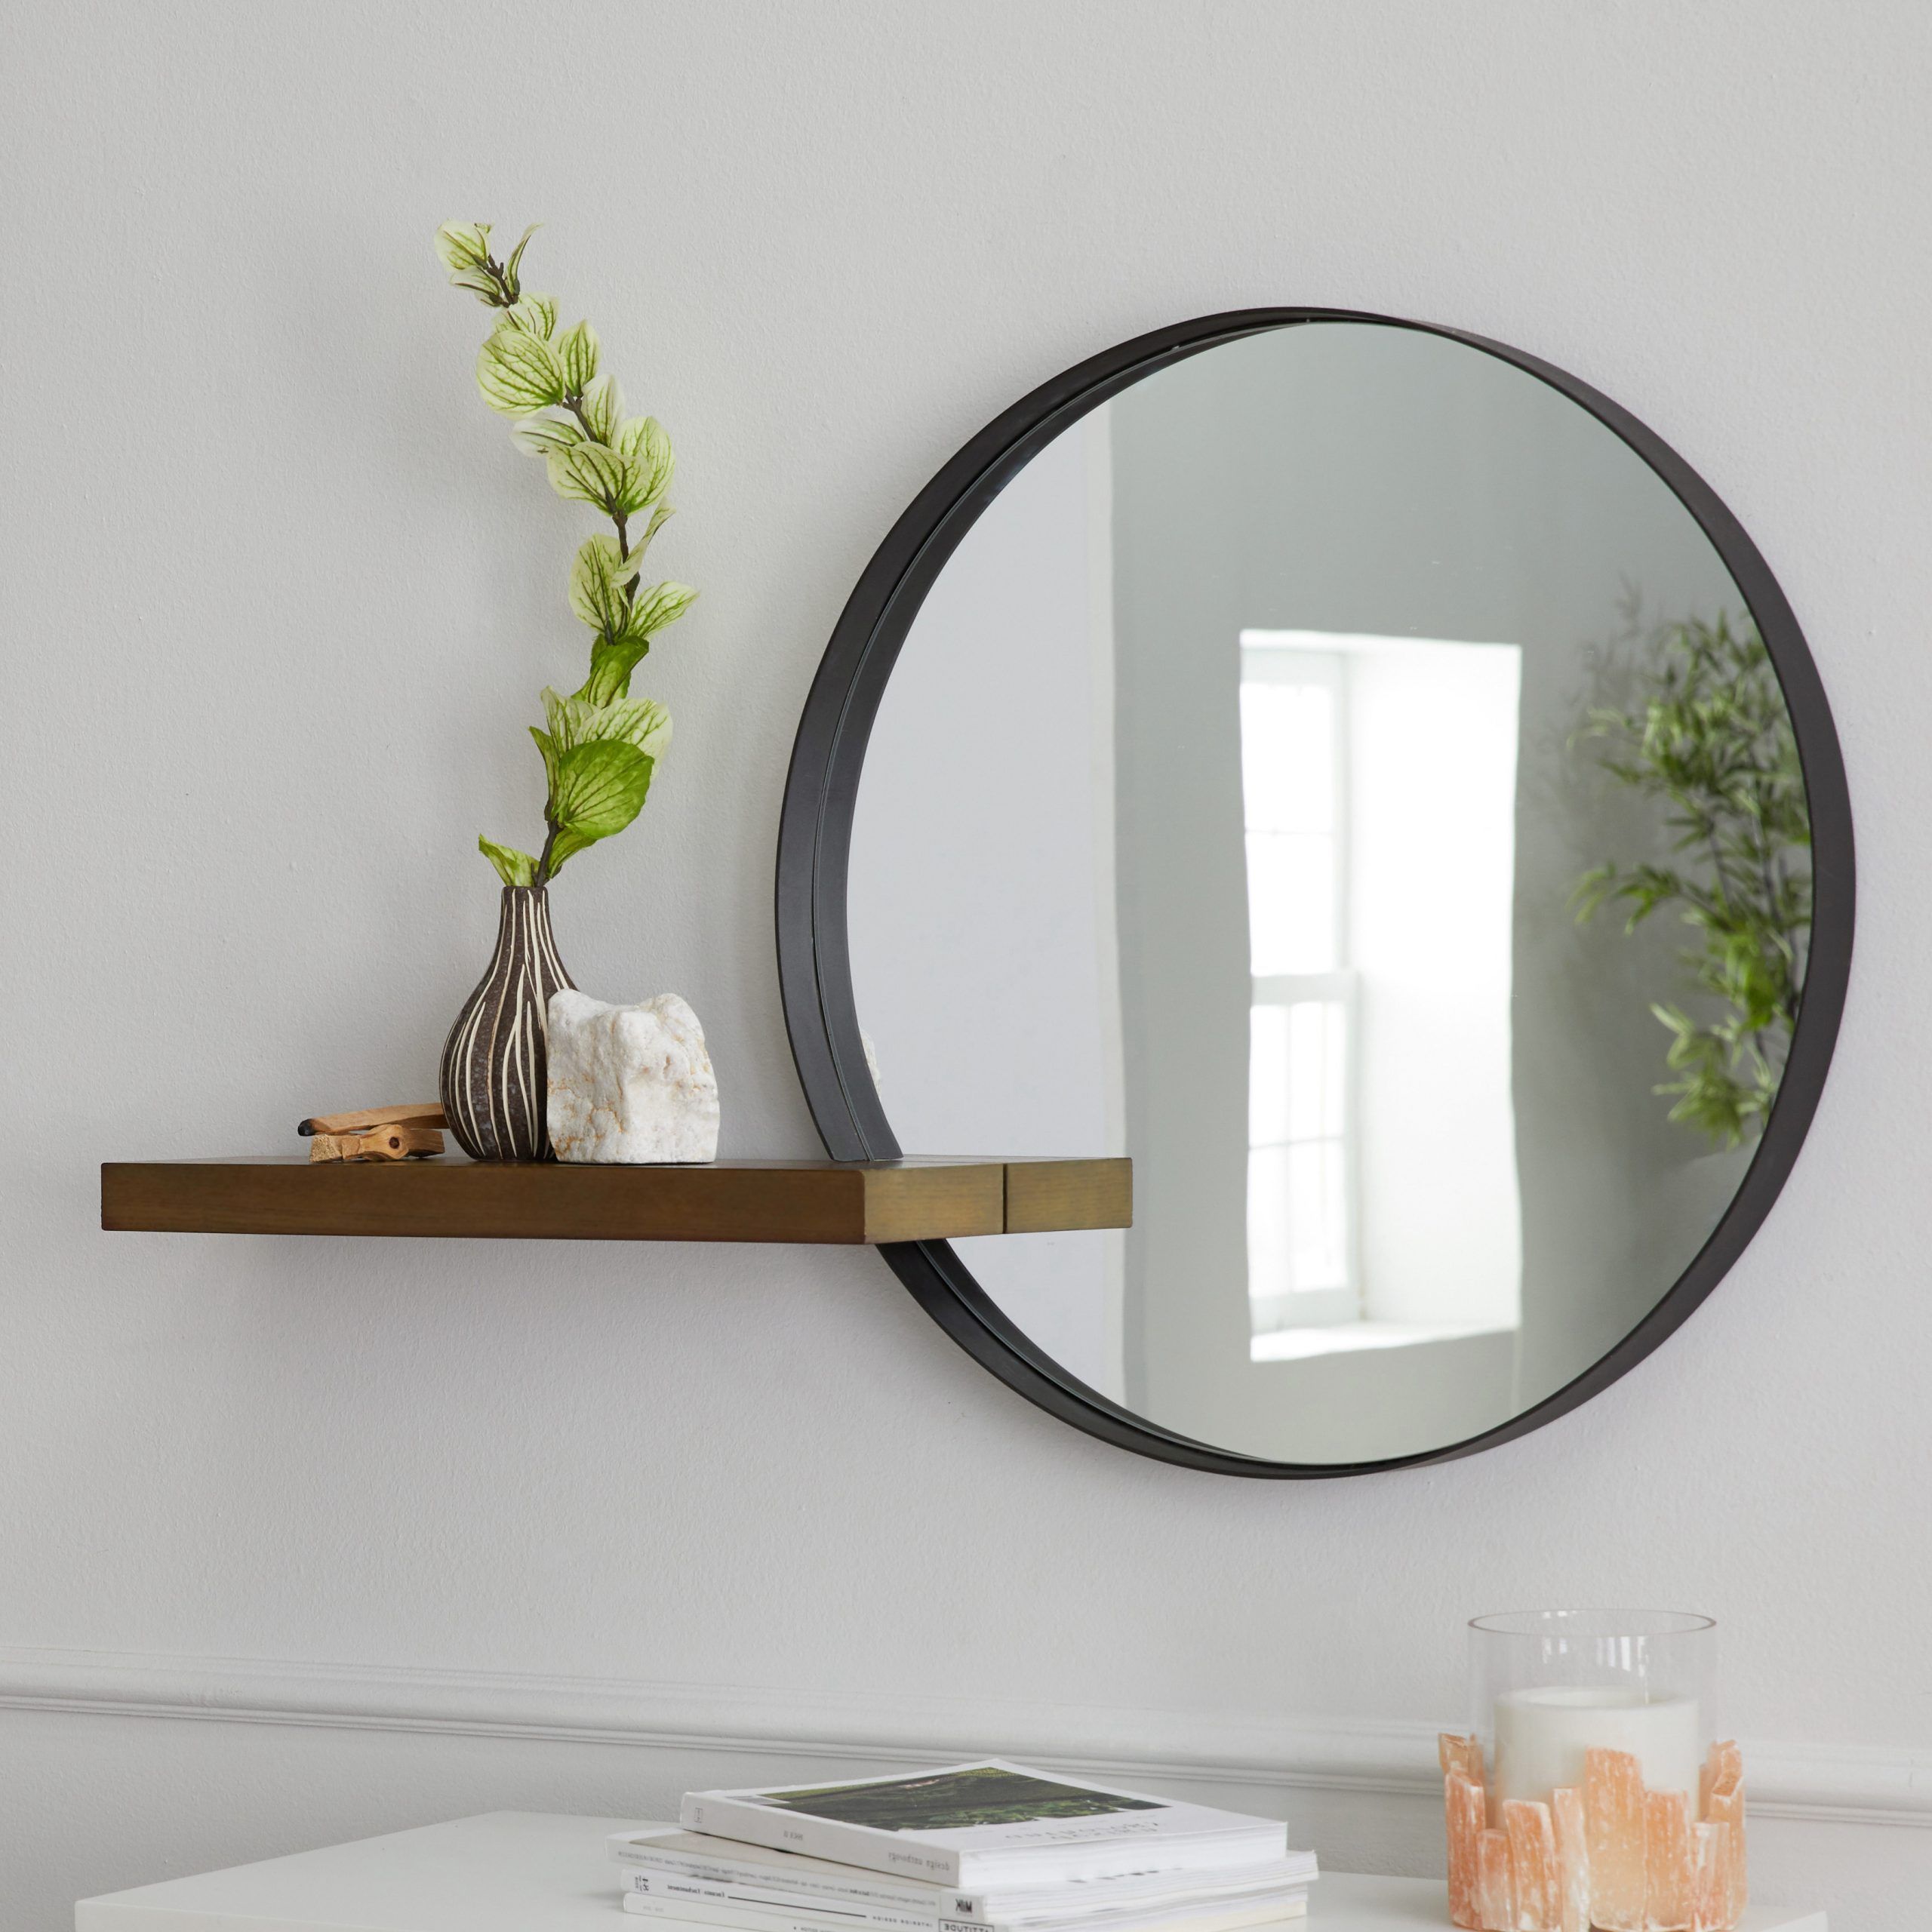 Modrn Naturals Metal Framed Round Decorative Wall Mirror With Wood With Regard To Famous Woven Metal Round Wall Mirrors (View 11 of 15)